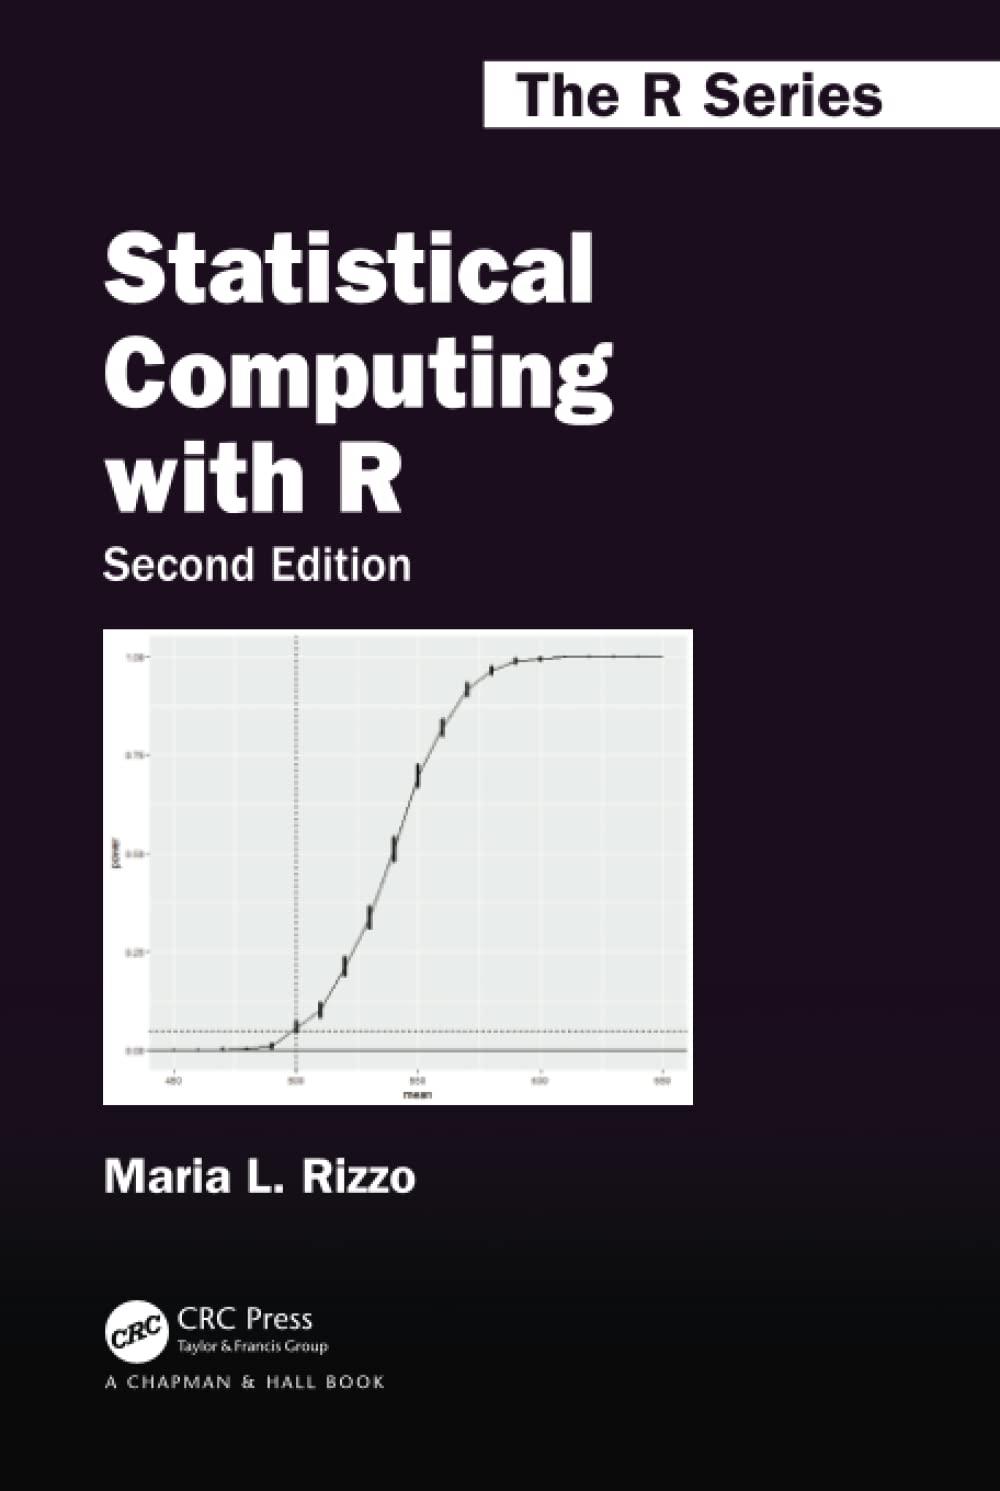 statistical computing with r 2nd edition maria l. rizzo 1466553324, 978-1466553323